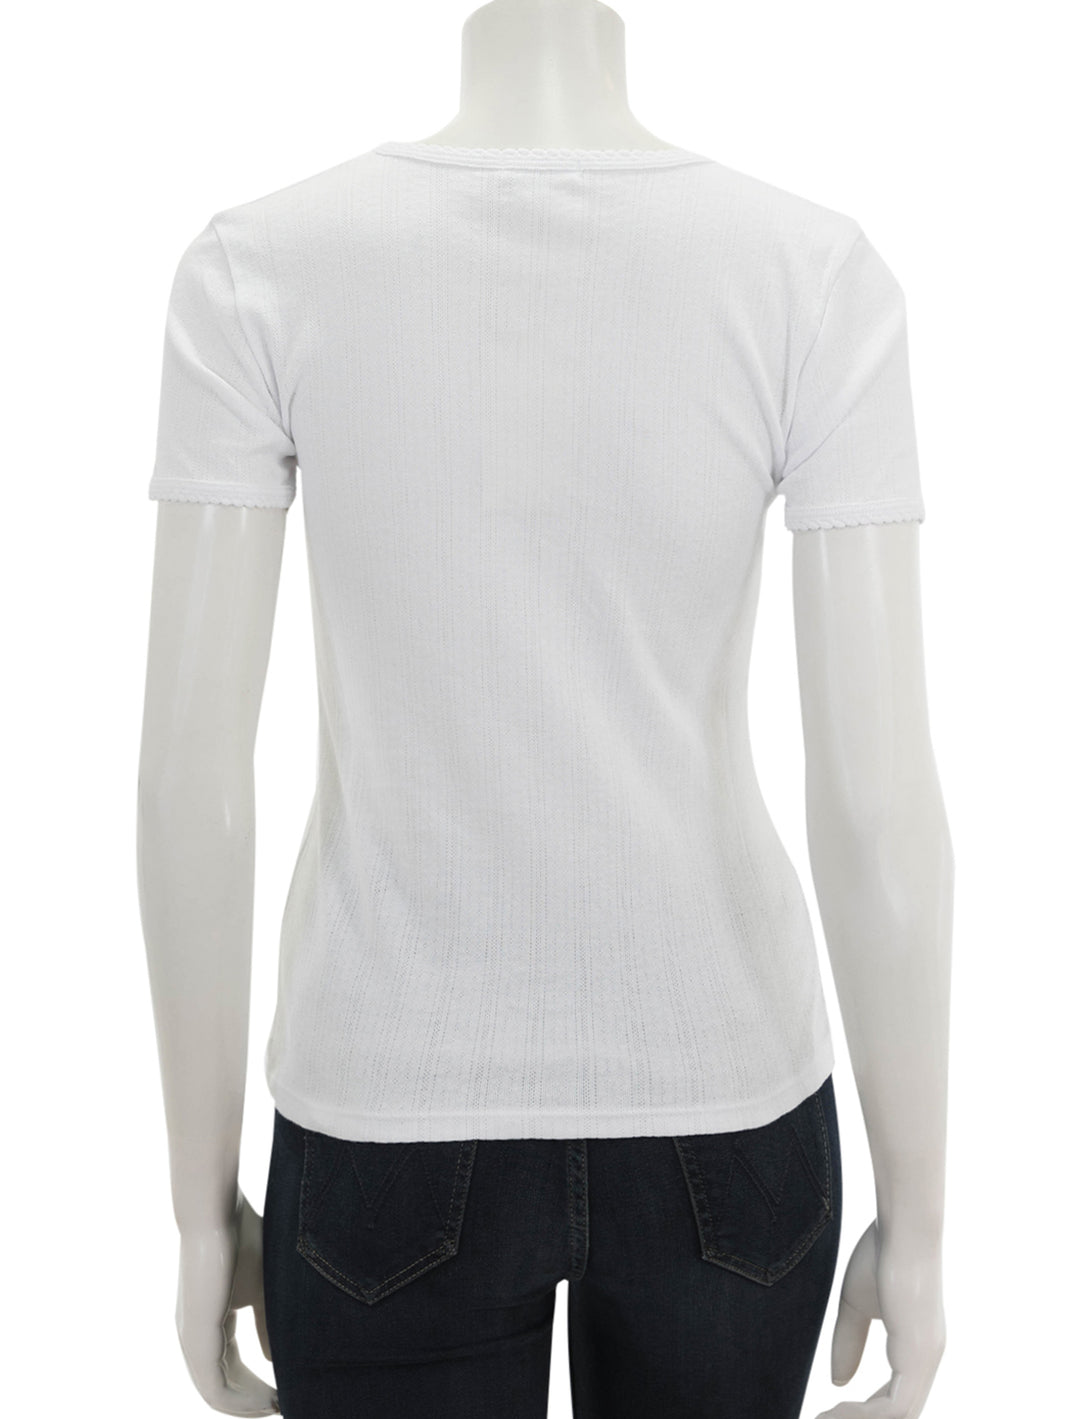 Back view of Goldie Lewinter's short sleeve pointelle tee in white.